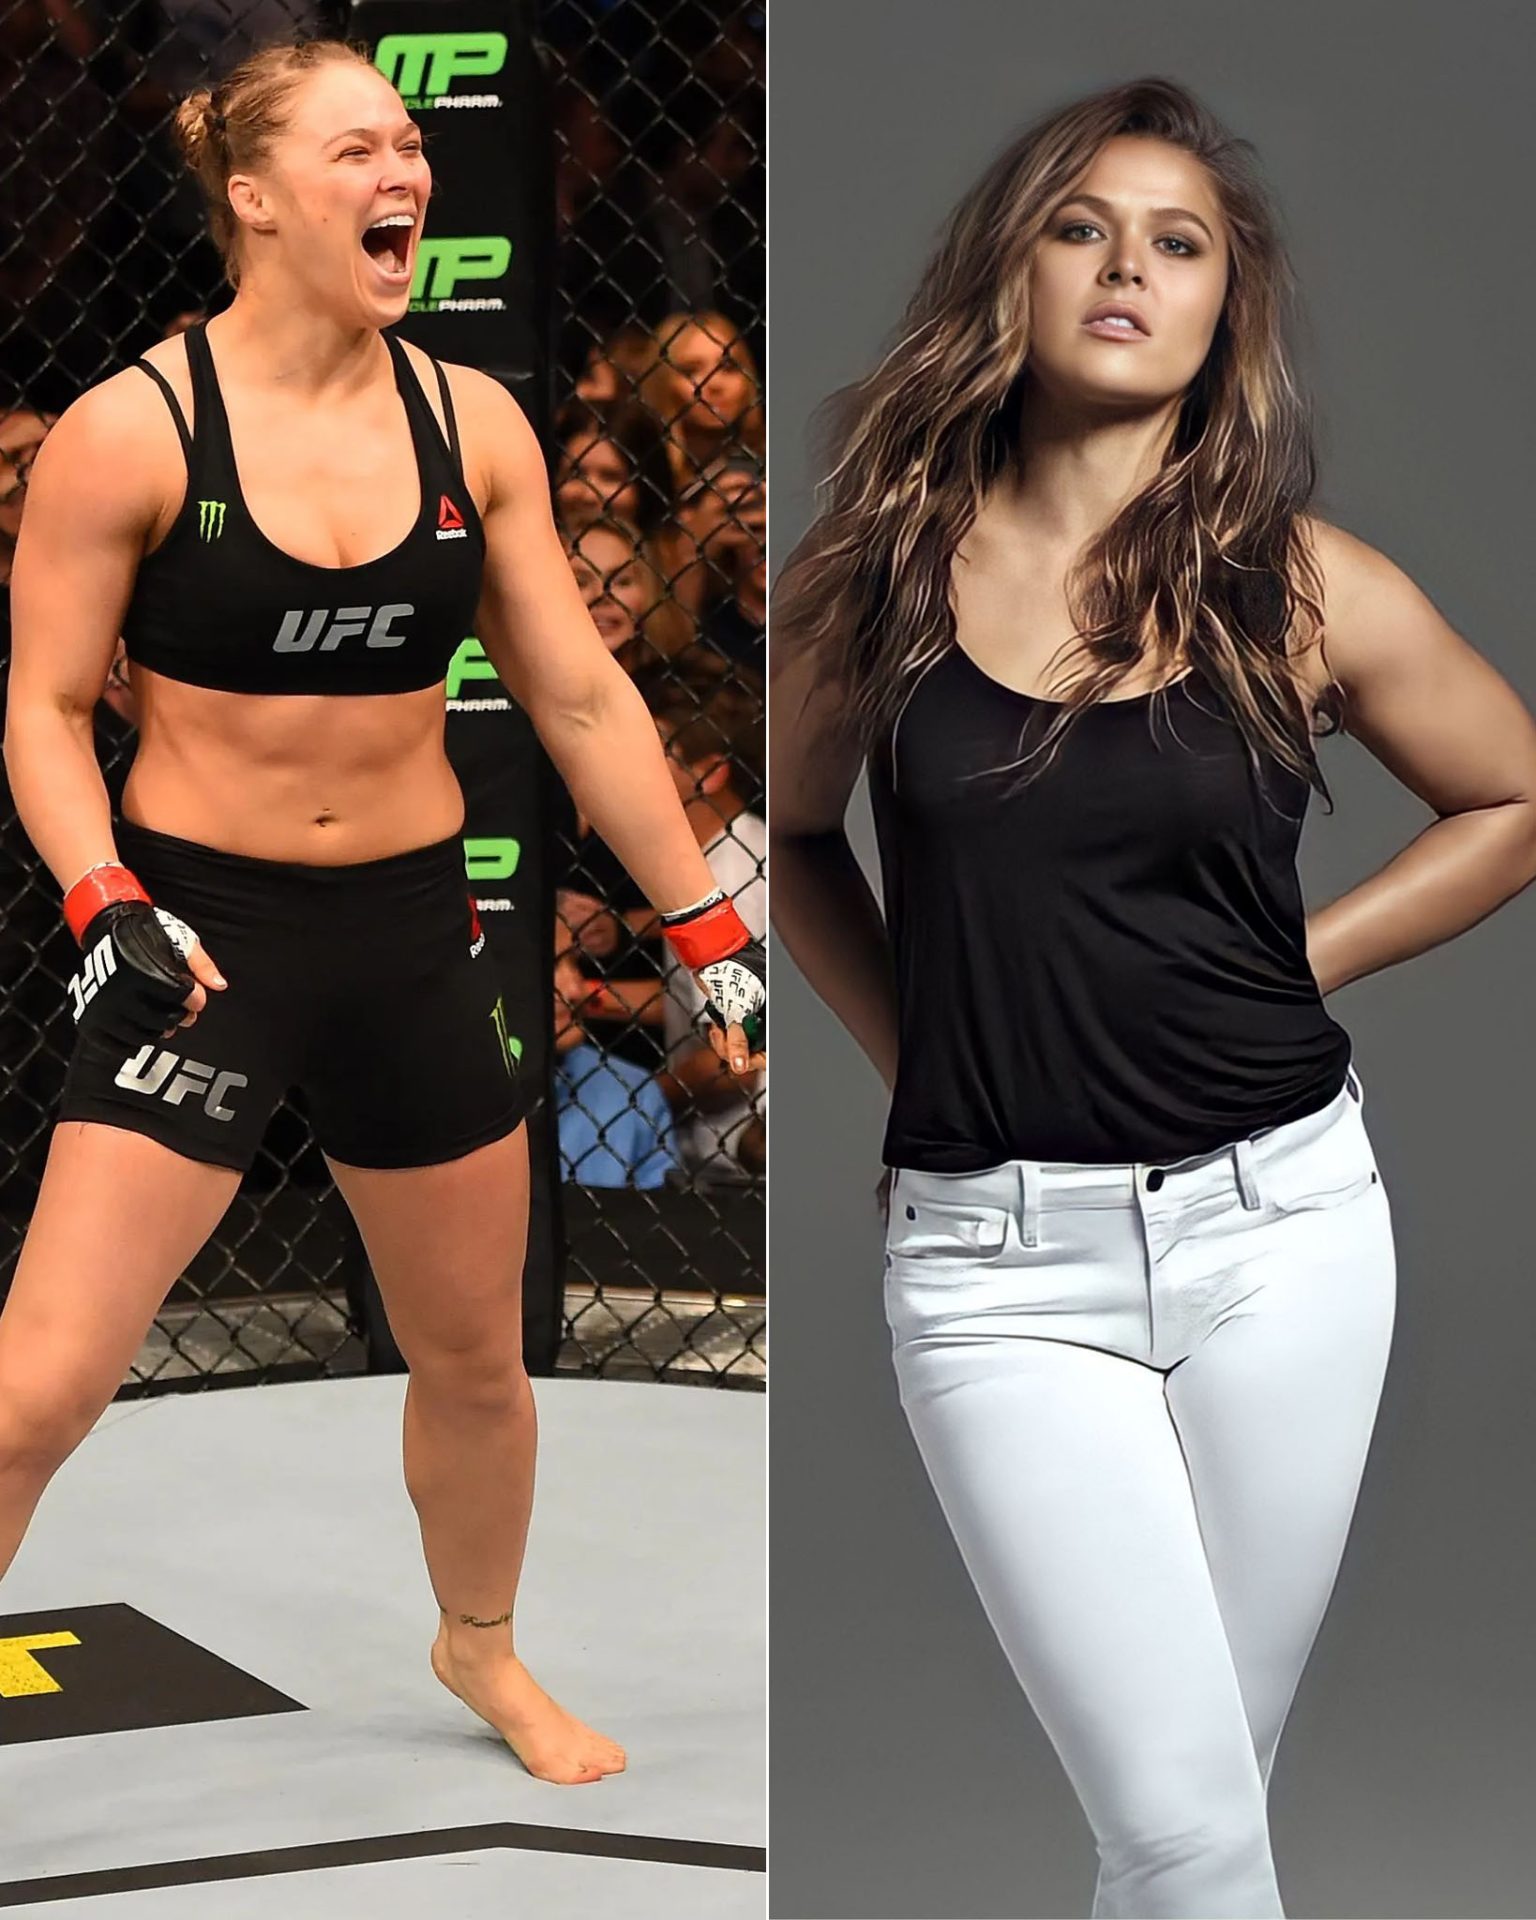 Ronda Rousey to WWE… legendary manager offers UFC star the chance to become a Paul Heyman girl